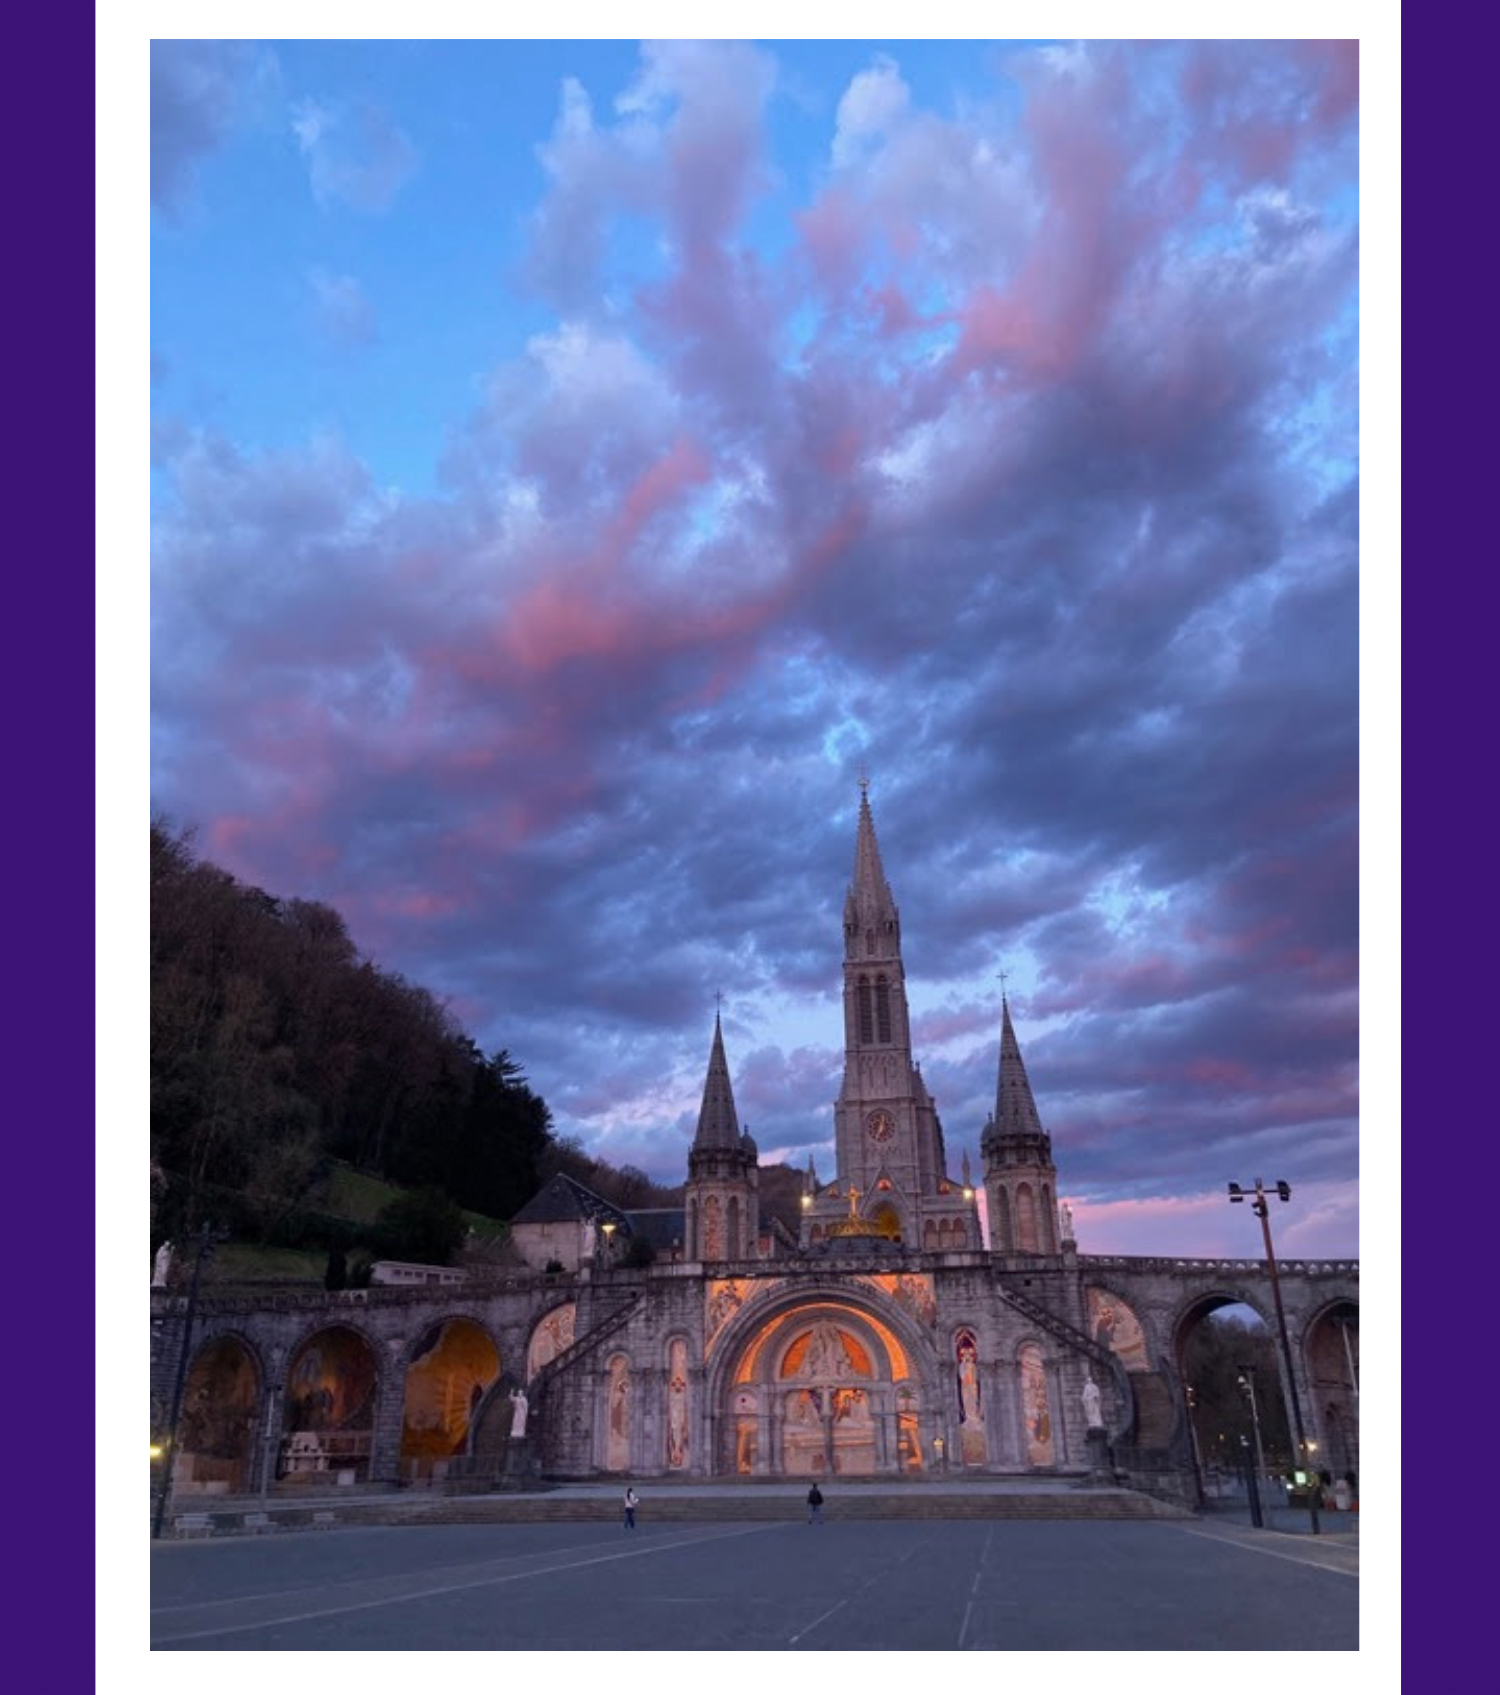 Christian Brothers Academy in Syracuse, NY alumni visits Lourdes. Beautiful Sky over the Sanctuary of Our Lady of Lourdes.